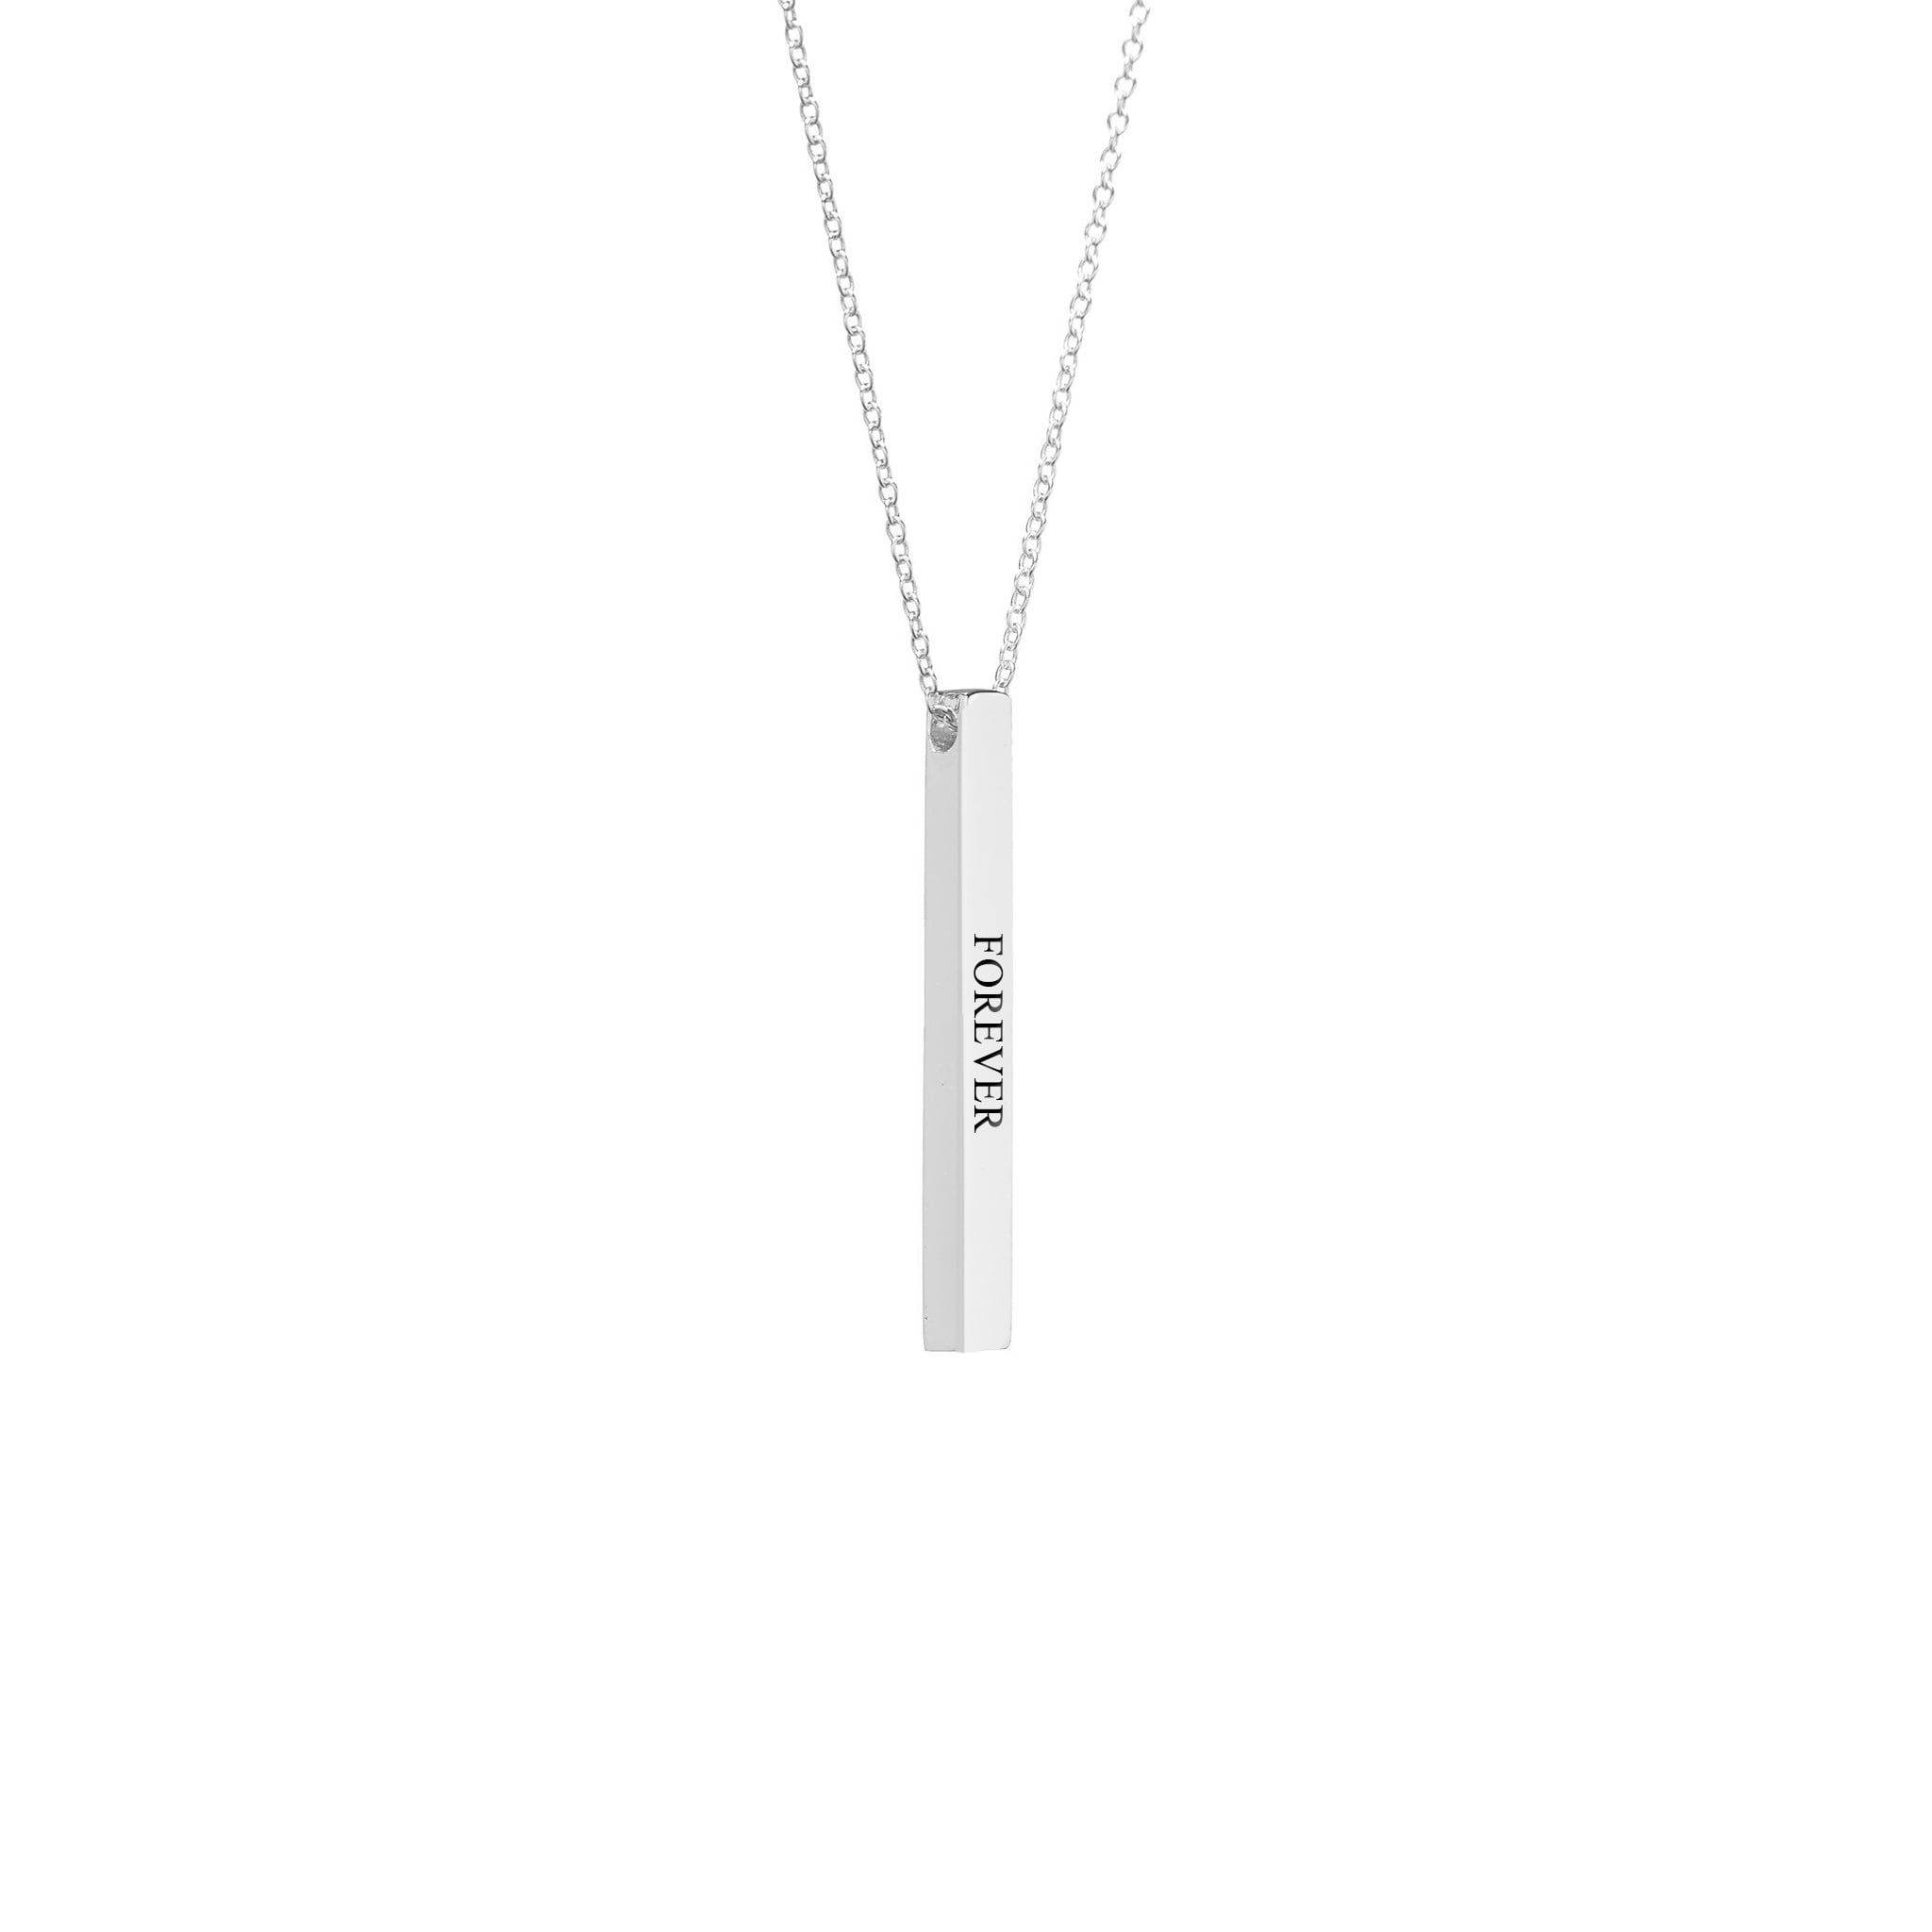 You are Loved Silver Pink Box Solid Stainless Steel Horizontal Heart Cut-Out Necklace 